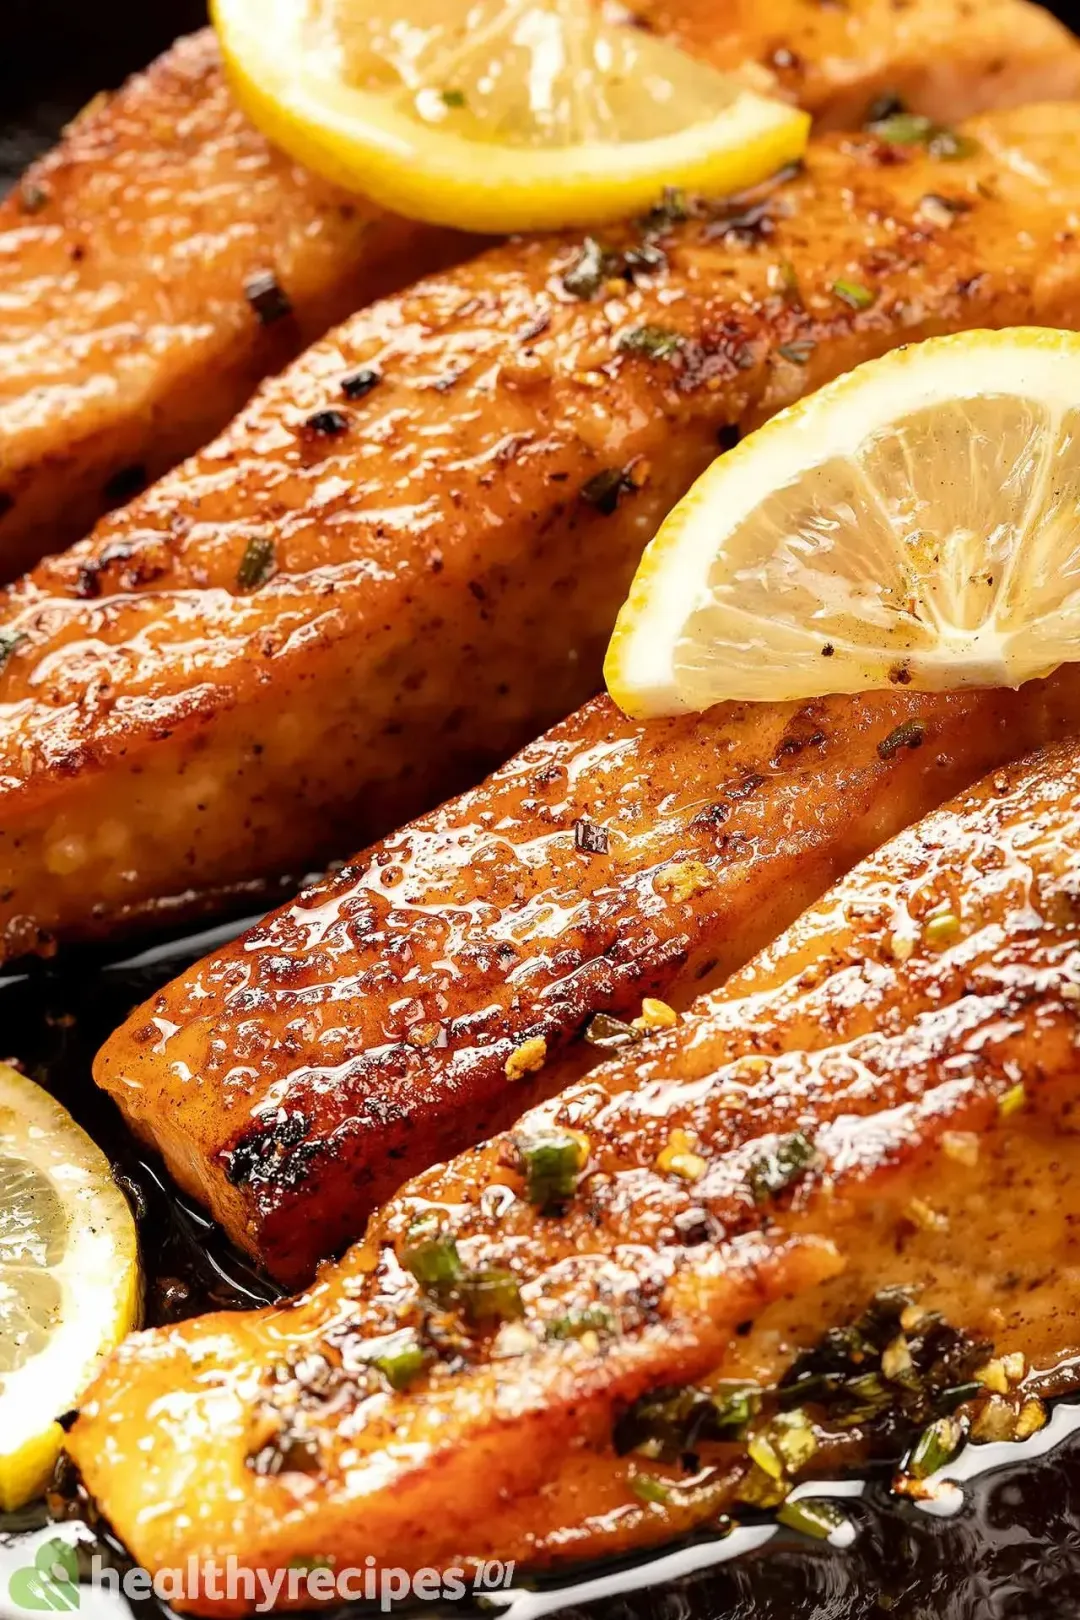 Four salmon filets coated in a glossy butter sauce, garnished with lemon slices in a cast iron skillet